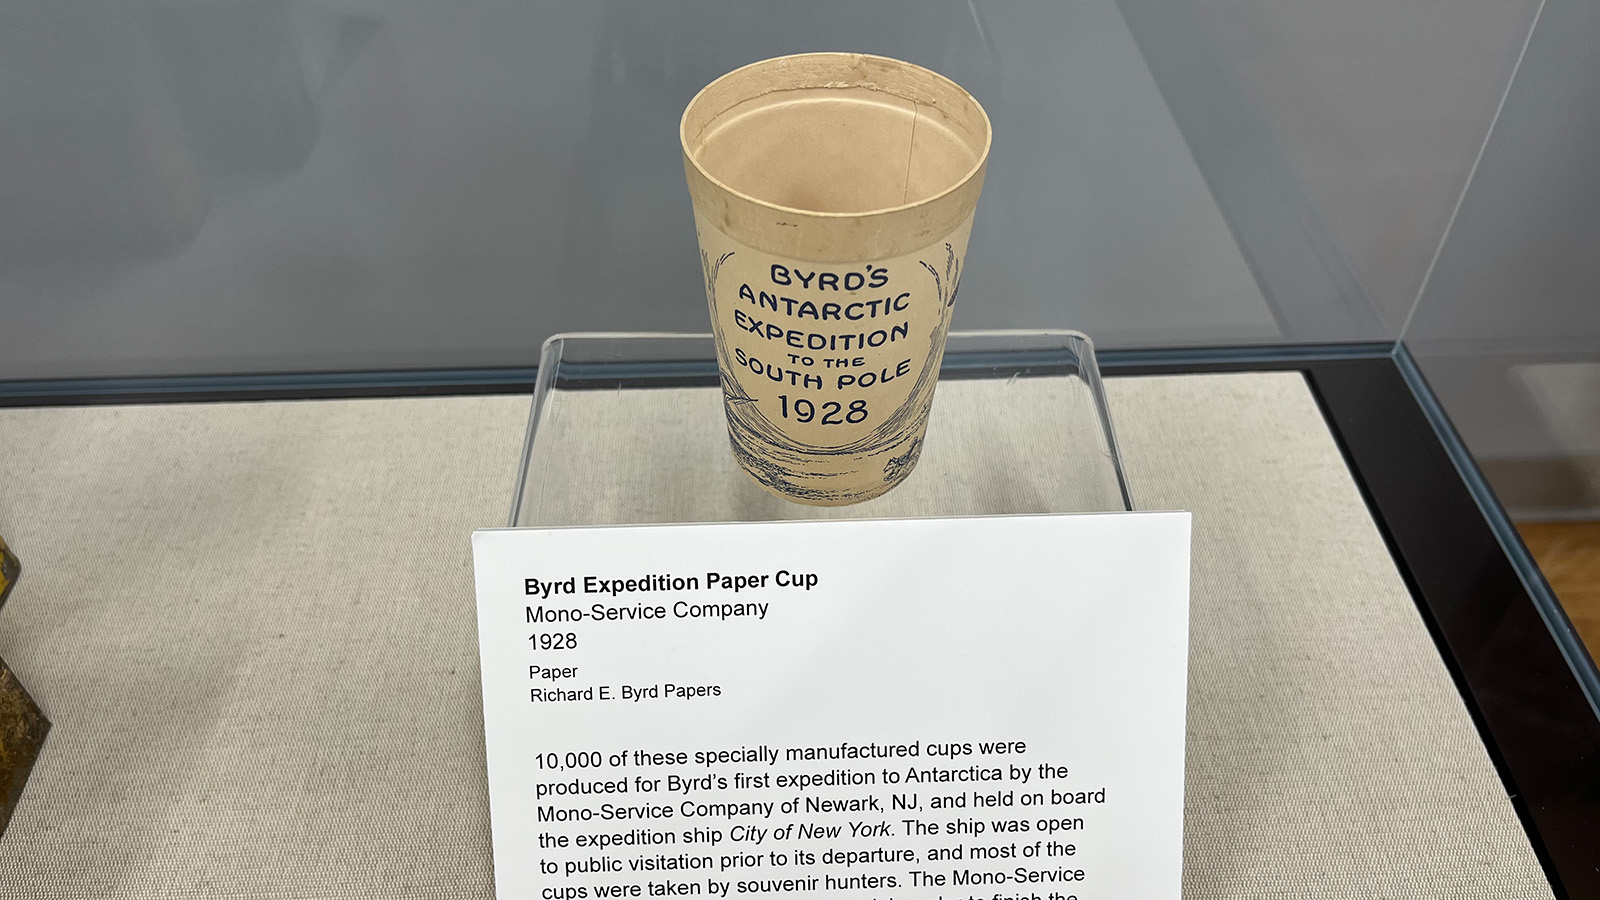 Byrd expedition paper cup with the text "Byrd's Antarctic Expedition to the South Pole 1928" on it.